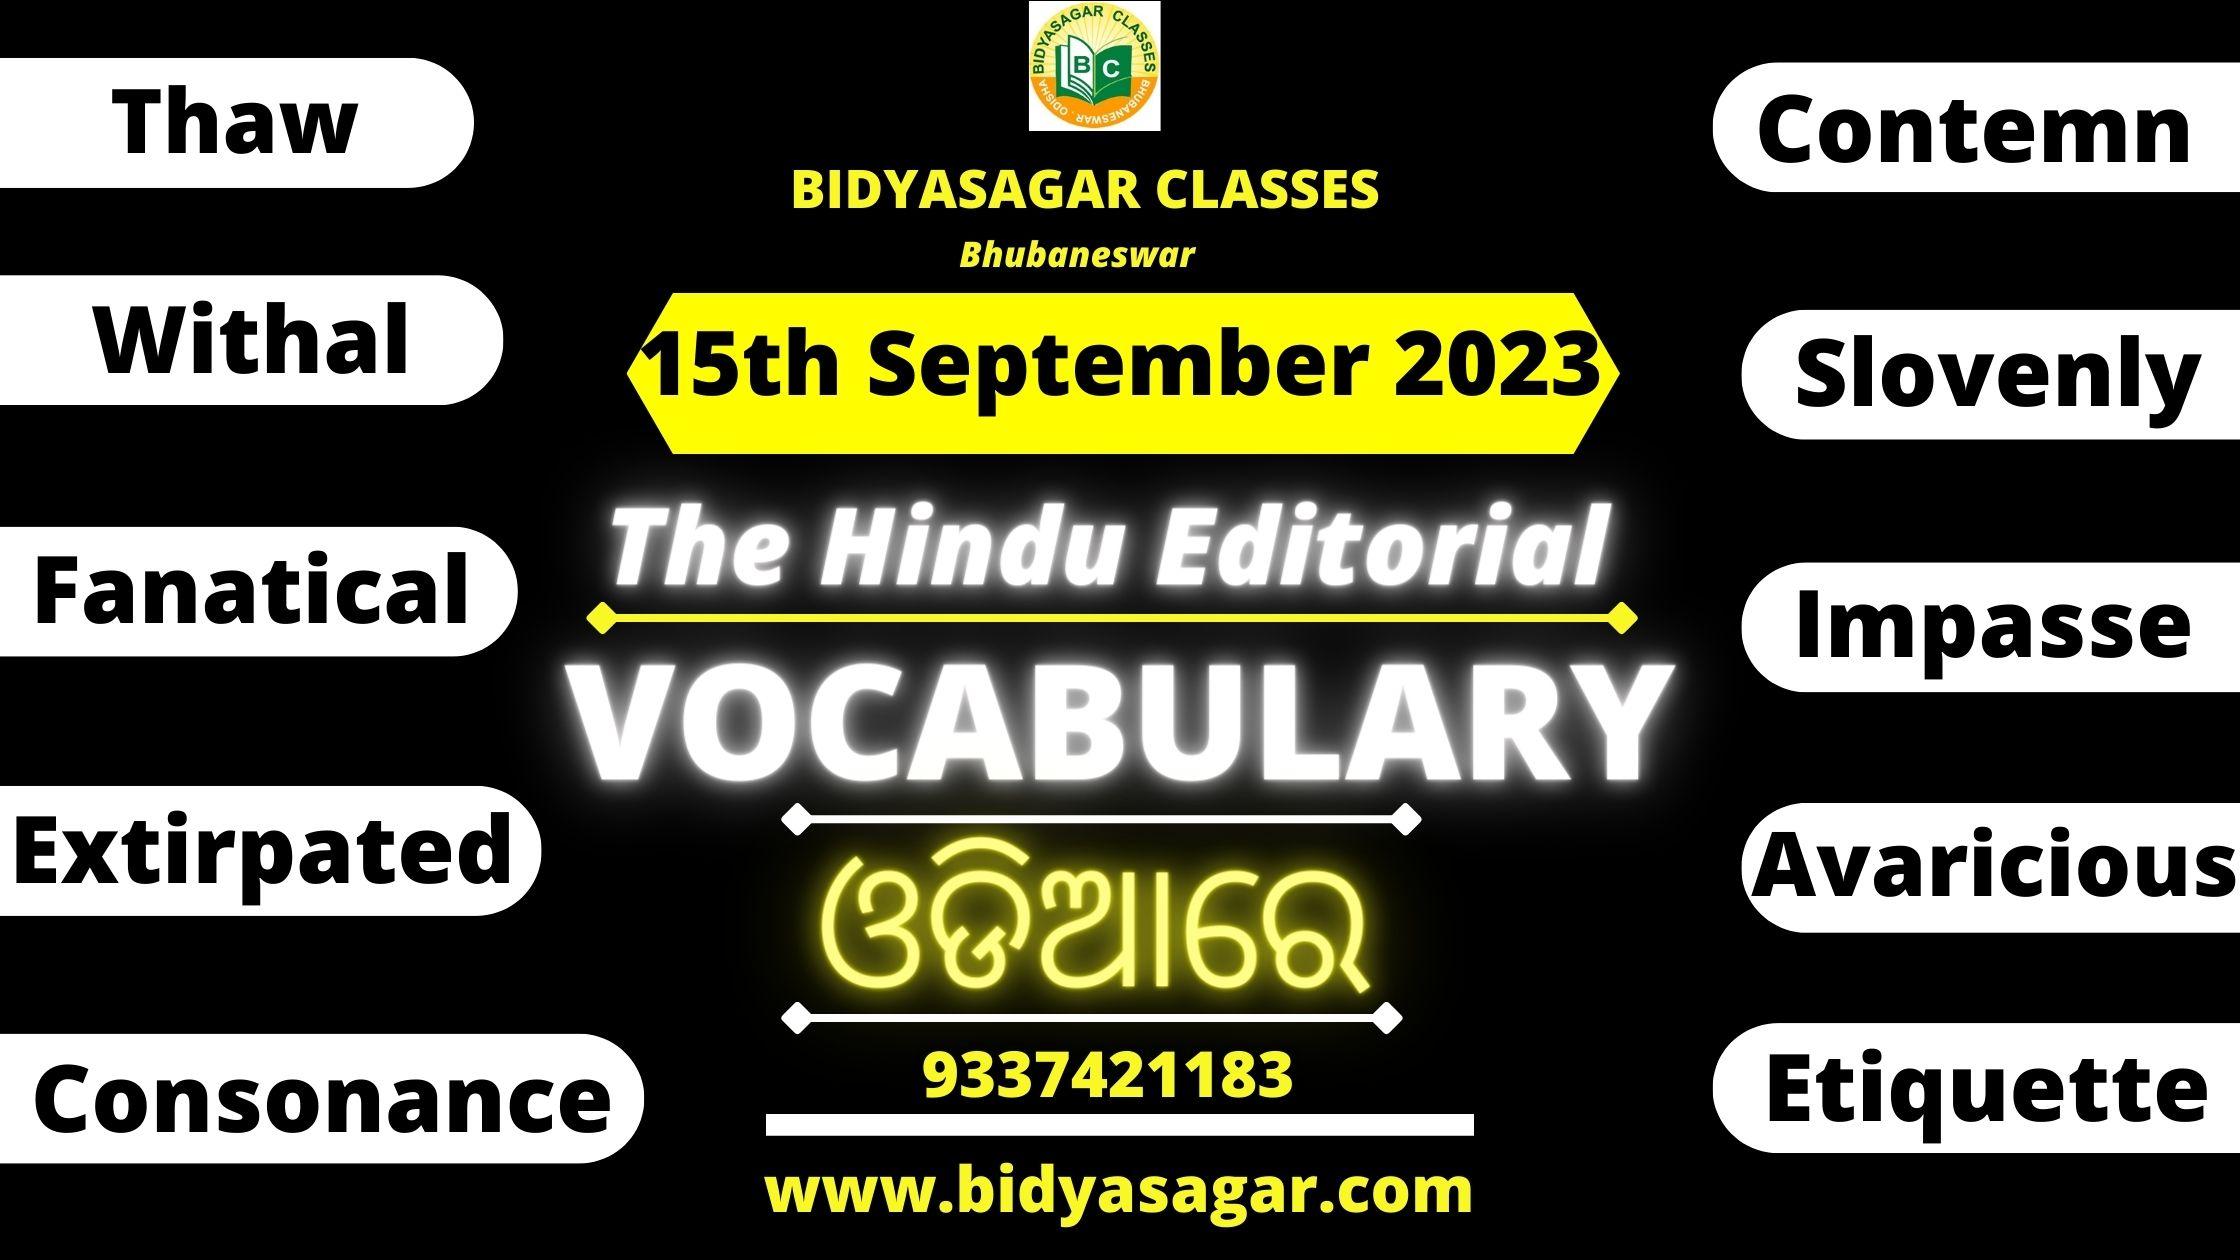 The Hindu Editorial Vocabulary of 15th September 2023